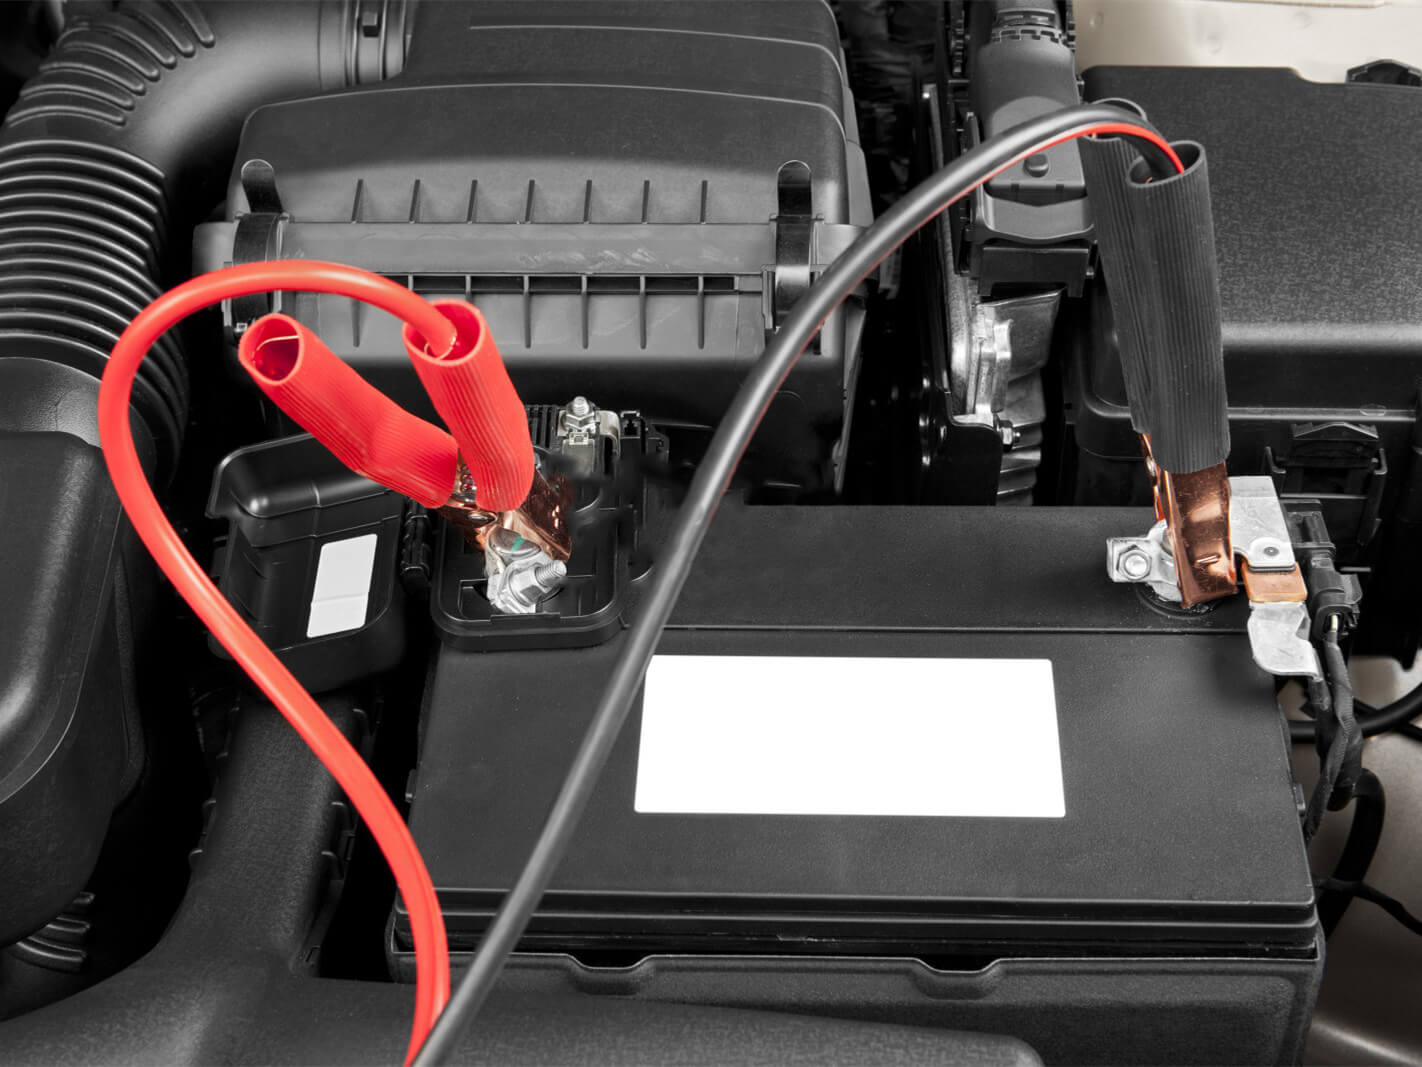 Can I Drive My Car with a Portable Jump Starter Attached?